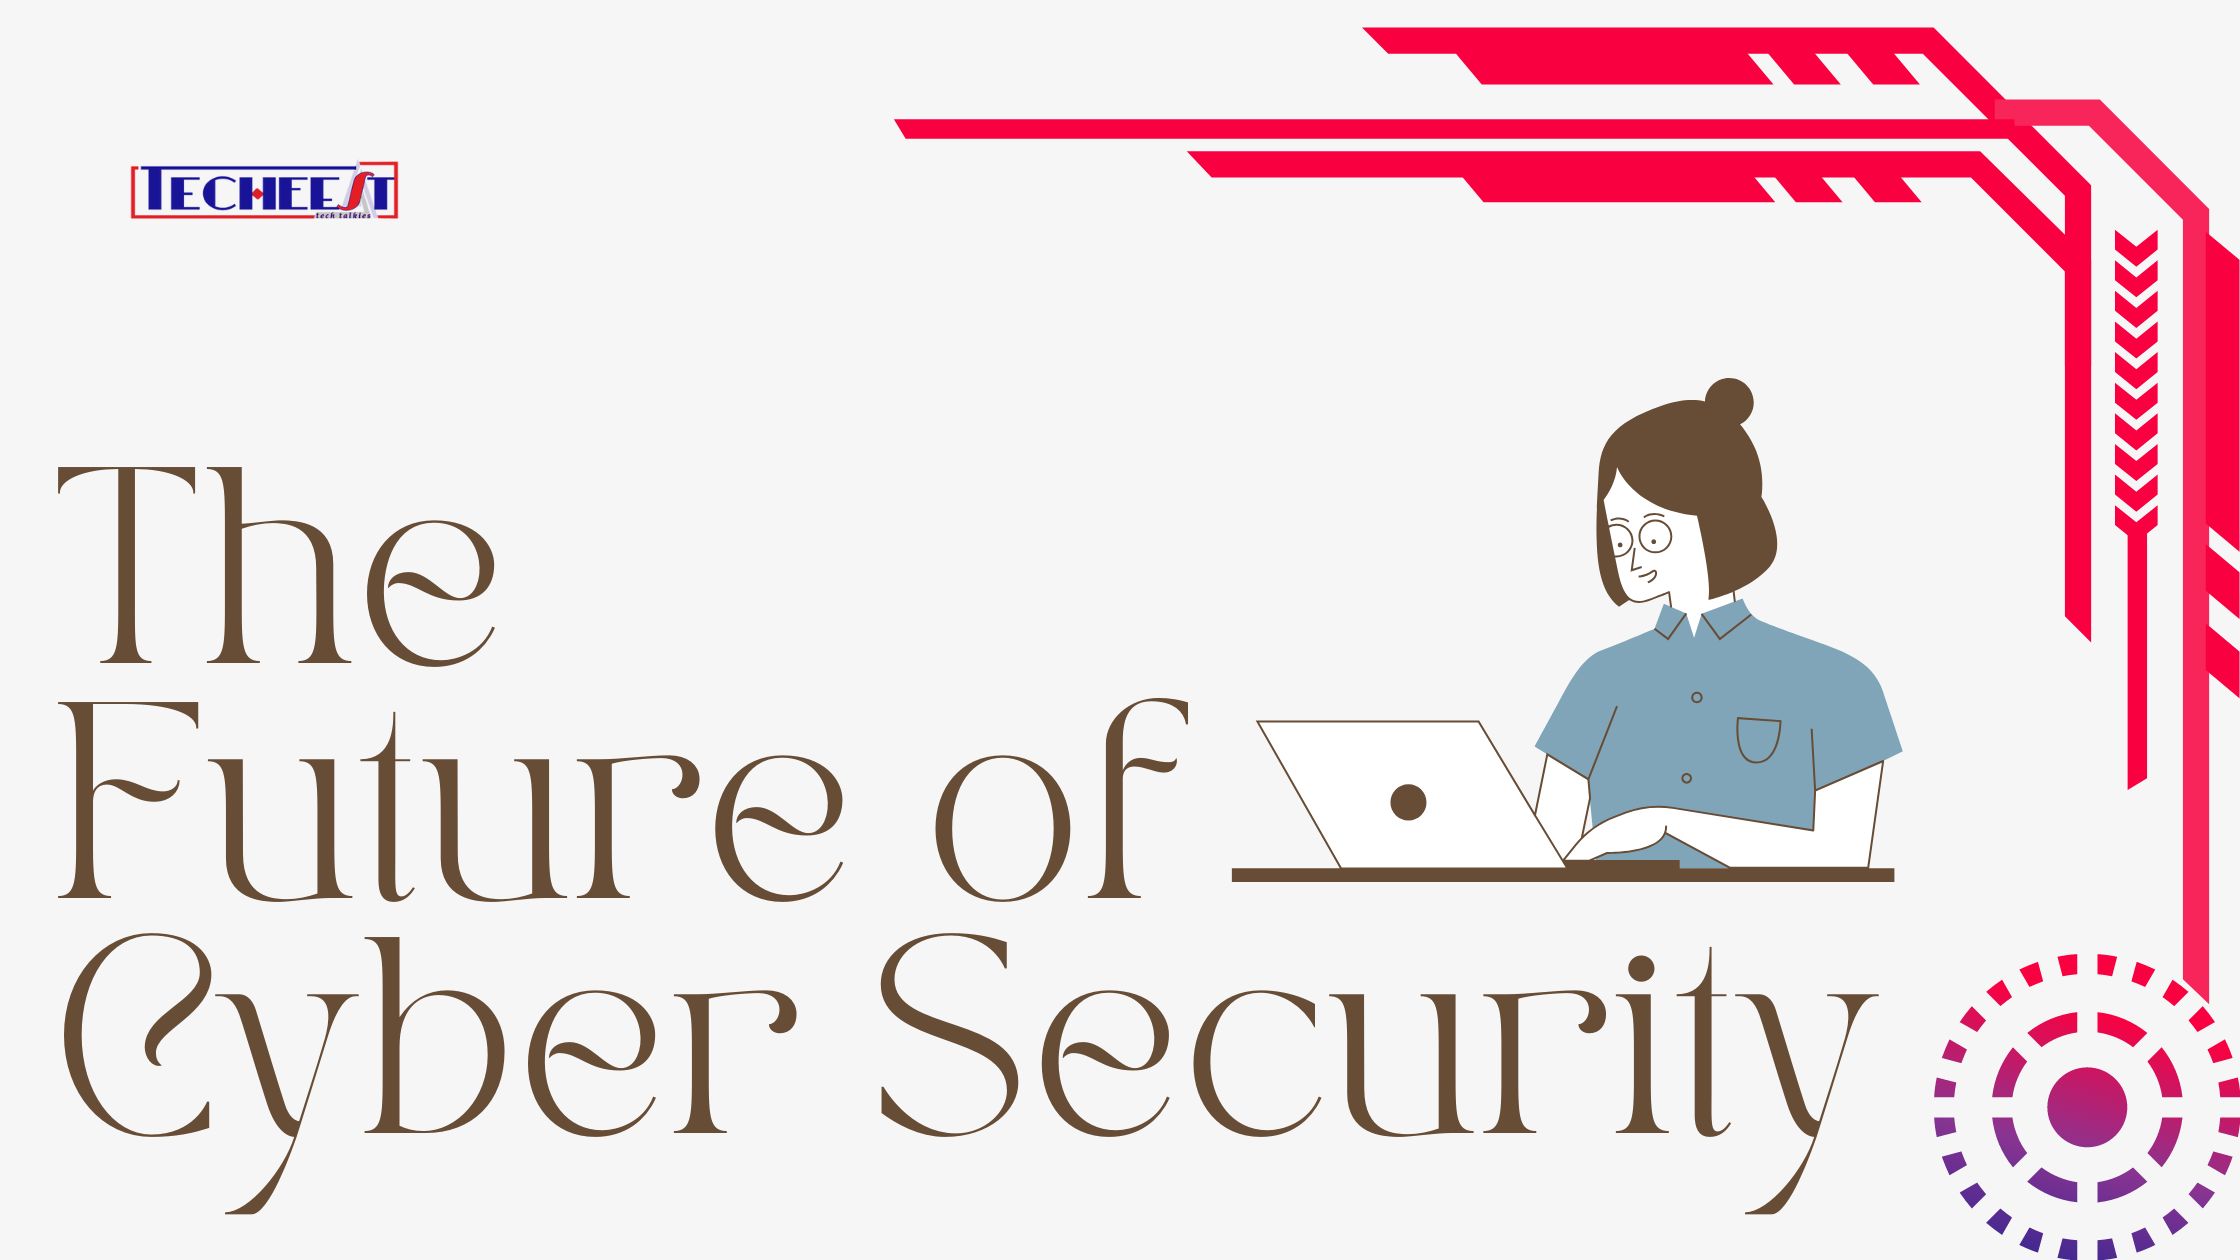 The Future of Cyber Security